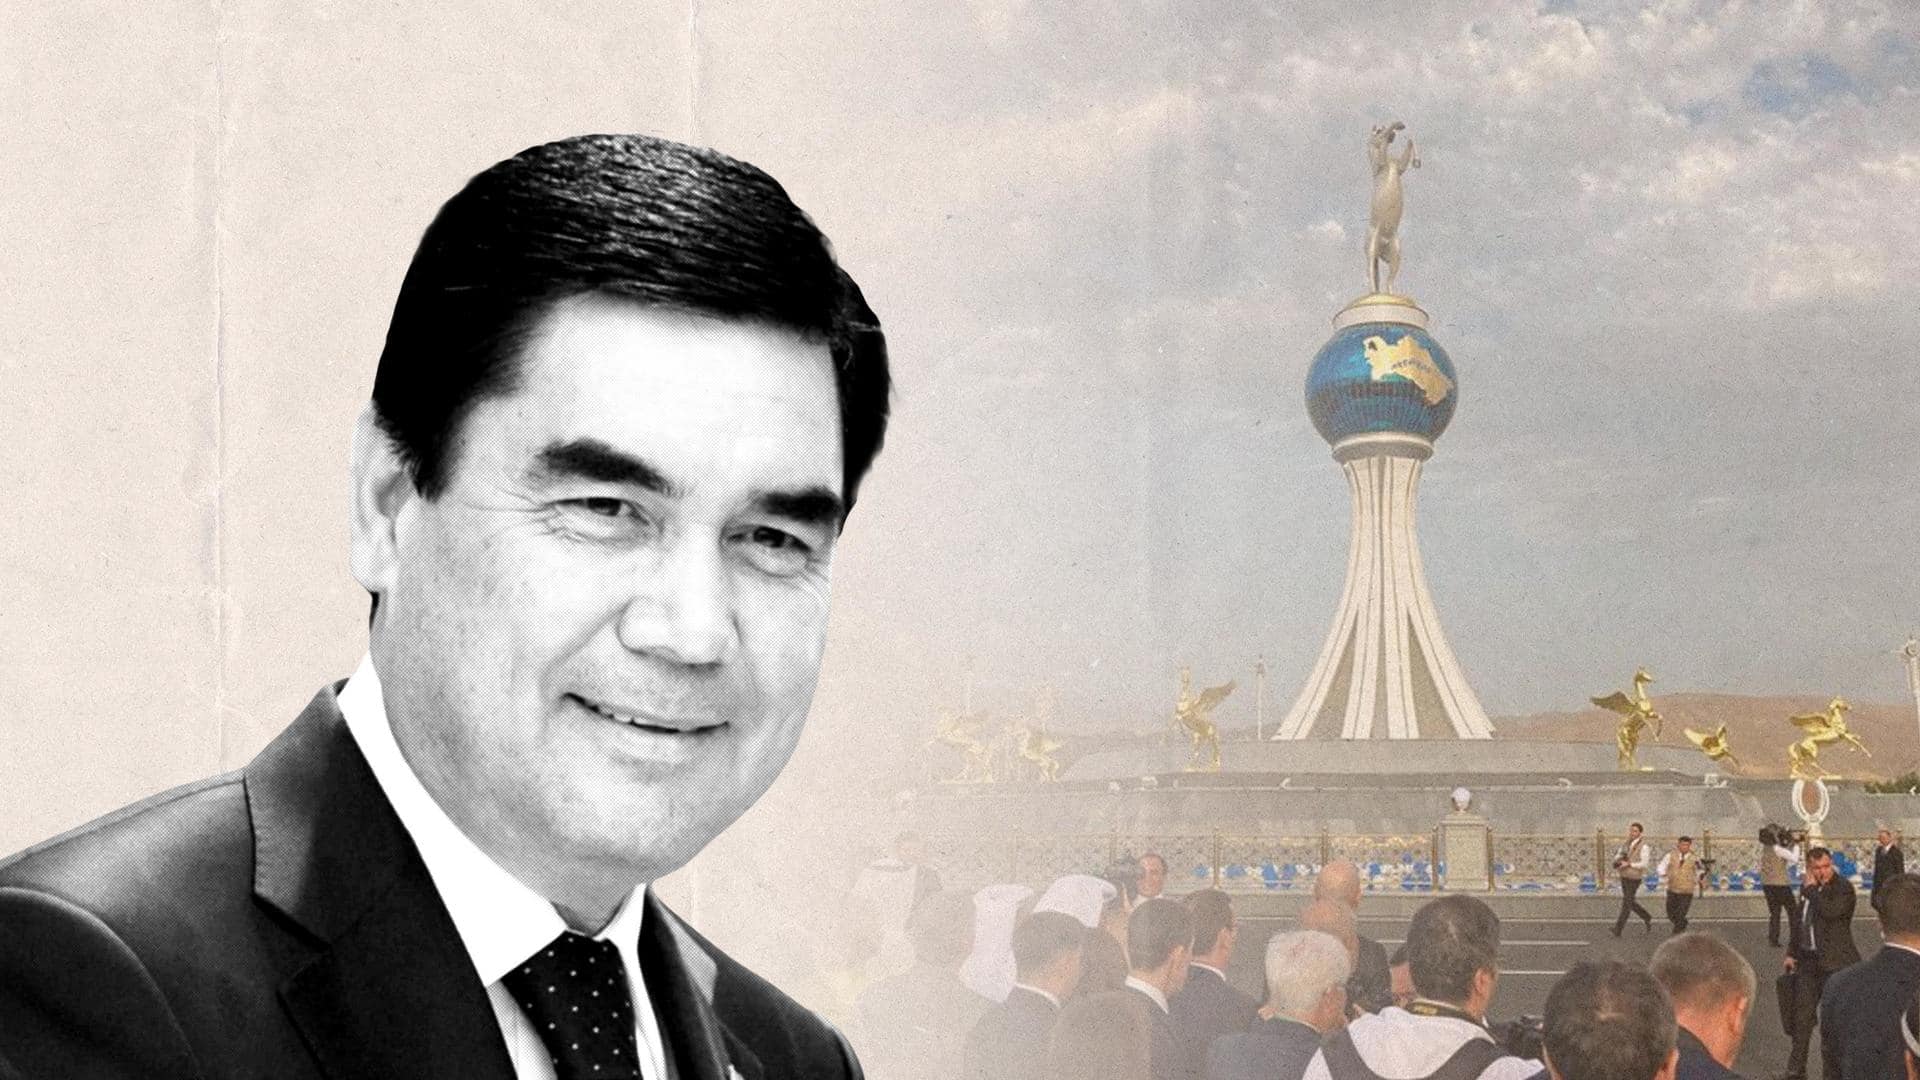 Turkmenistan unveils a futuristic city in honor of former president